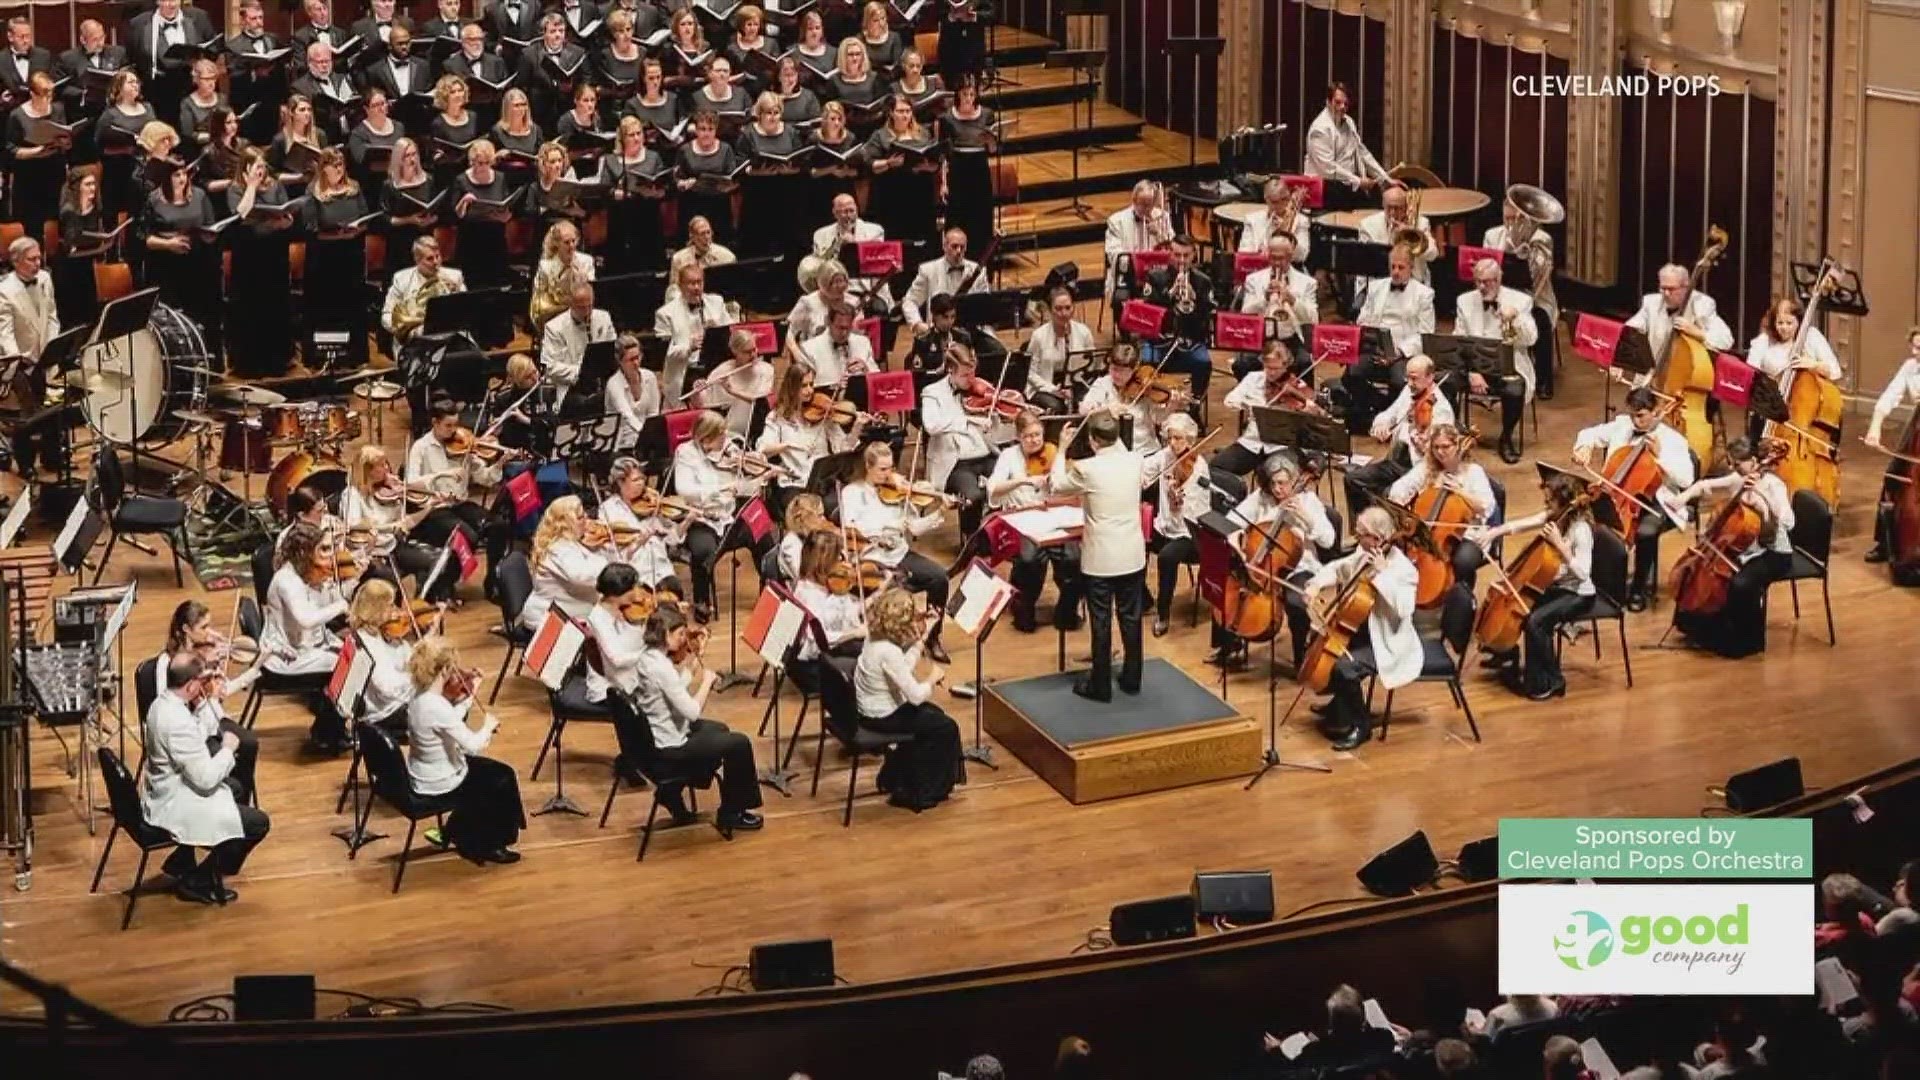 Joe sits down with Carl Topilow, Music Director & Founding Conductor of the Cleveland Pops Orchestra.  Sponsored by the Cleveland Pops Orchestra.